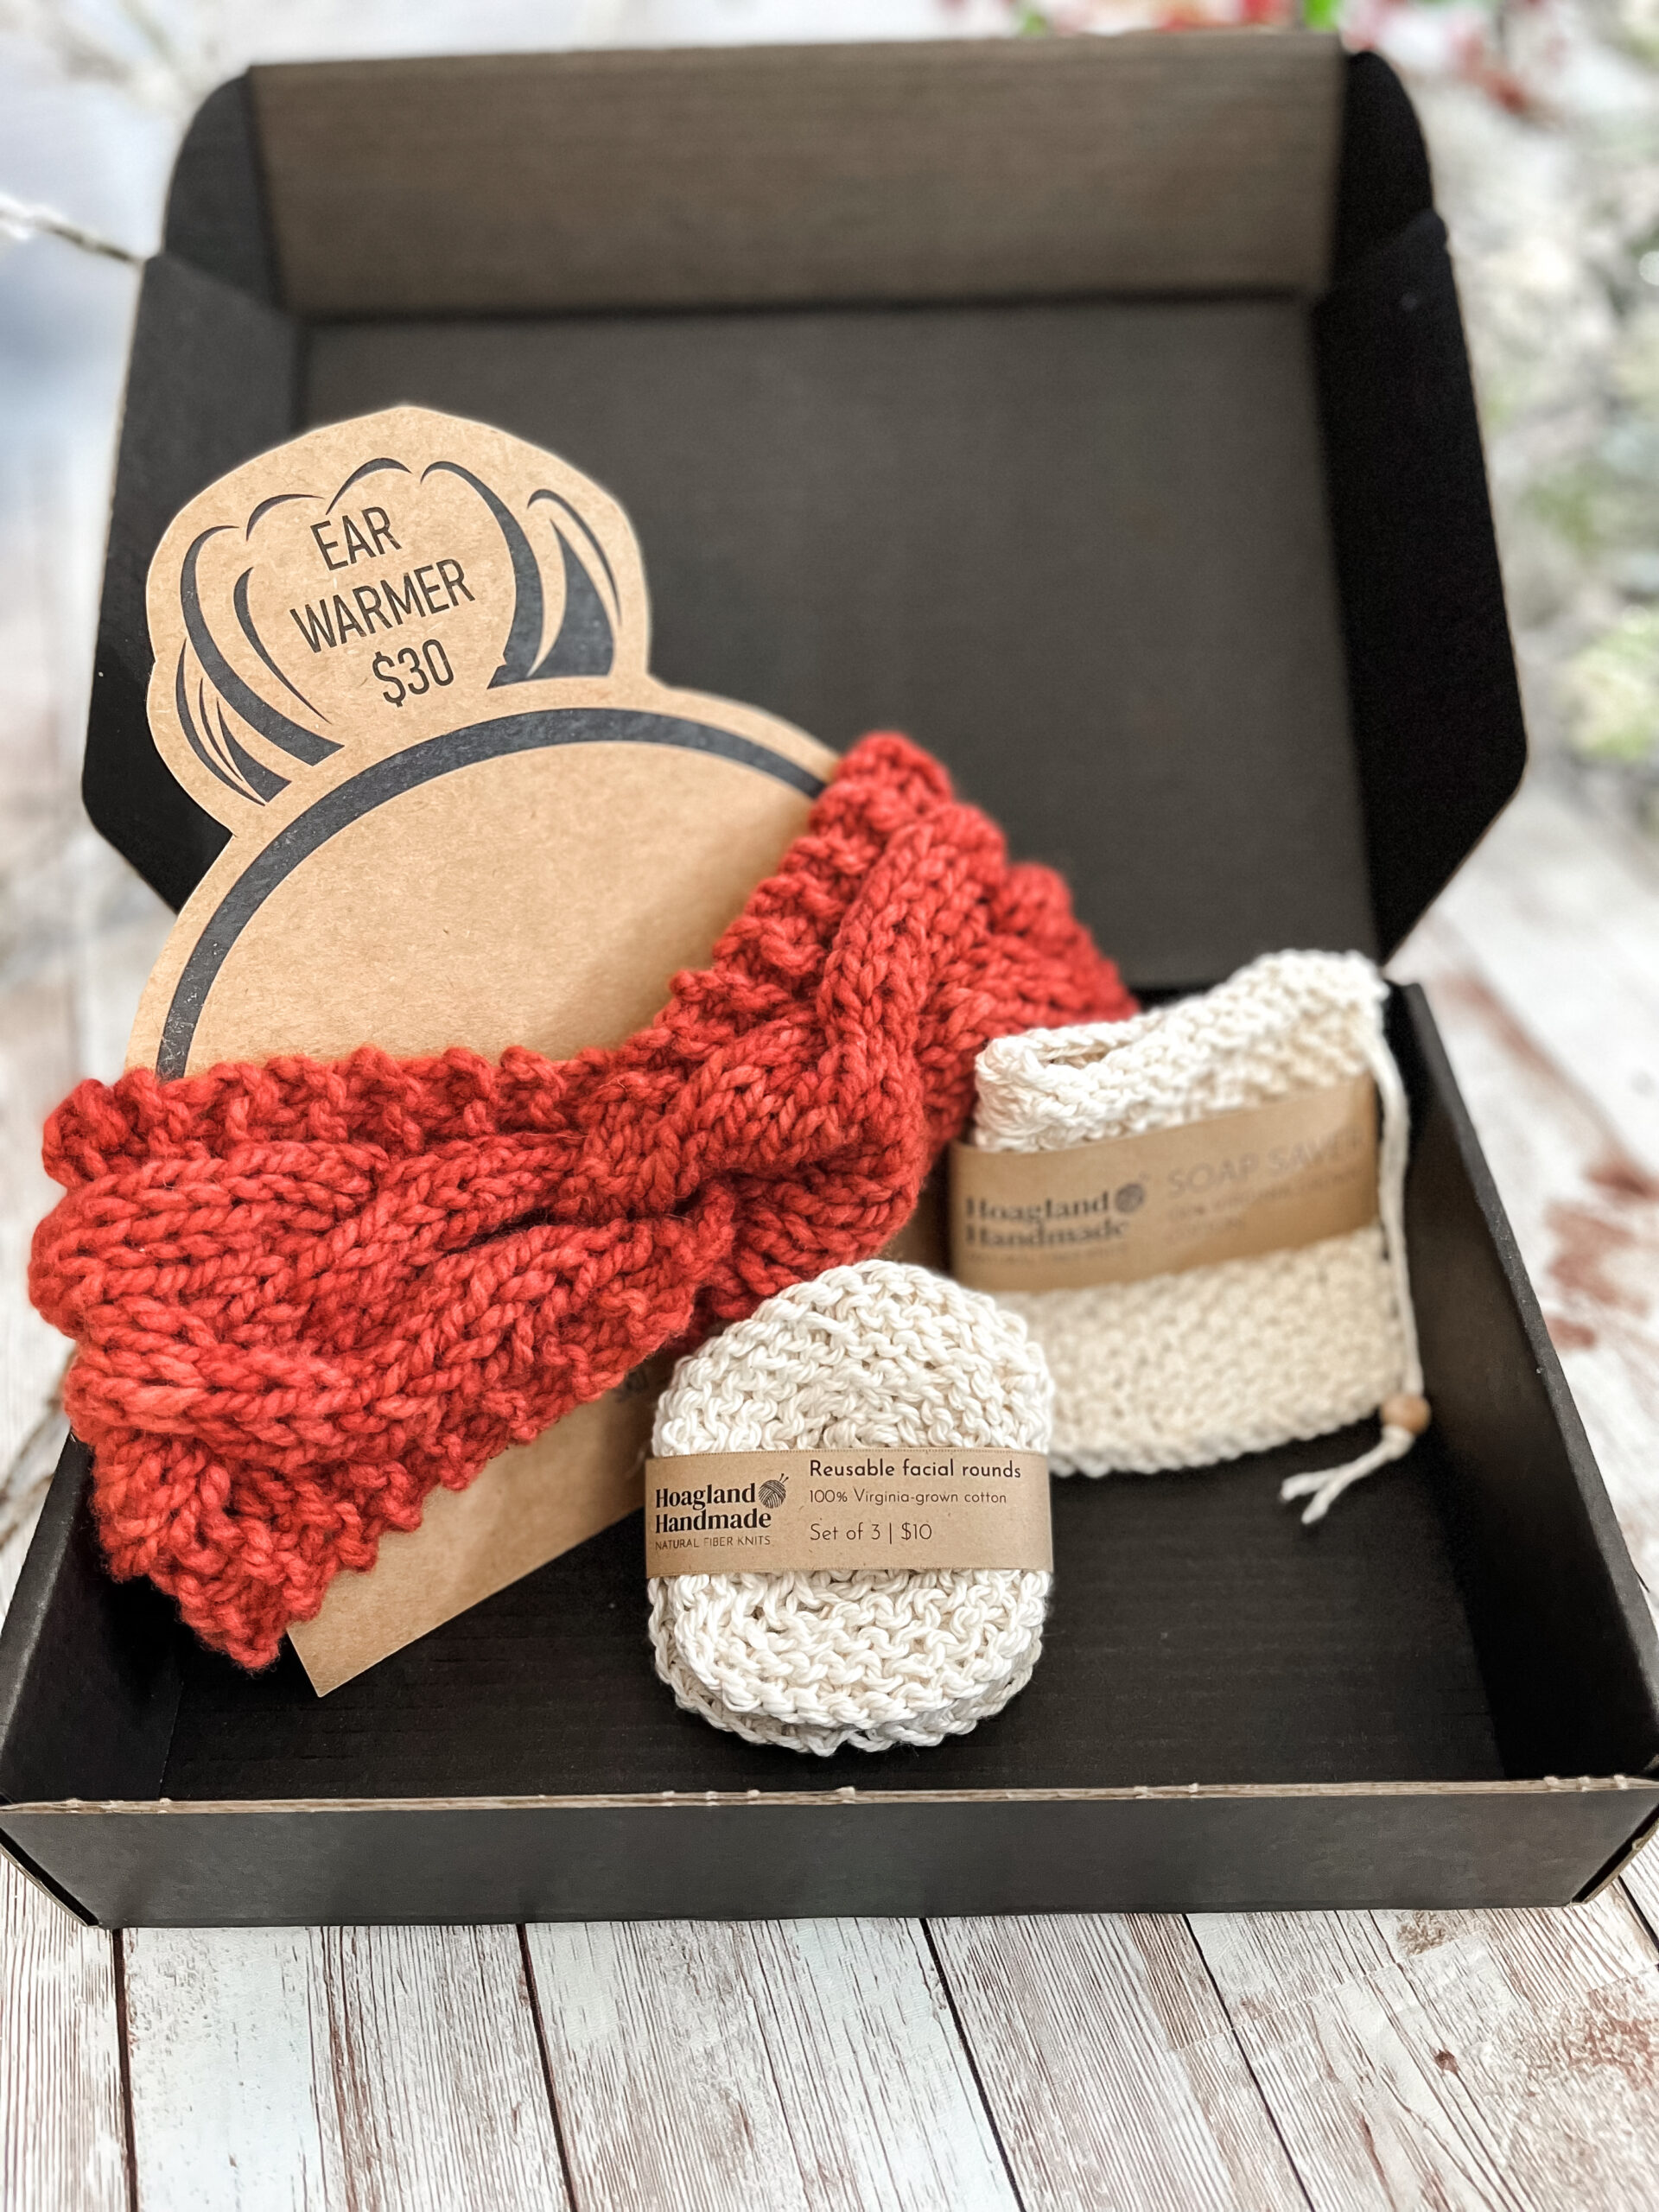 A black box contains an orange hand-dyed merino ear warmer displayed on a Kraft paper head with a messy bun, a Virginia-grown cotton soap saver and set of reusable facial rounds.